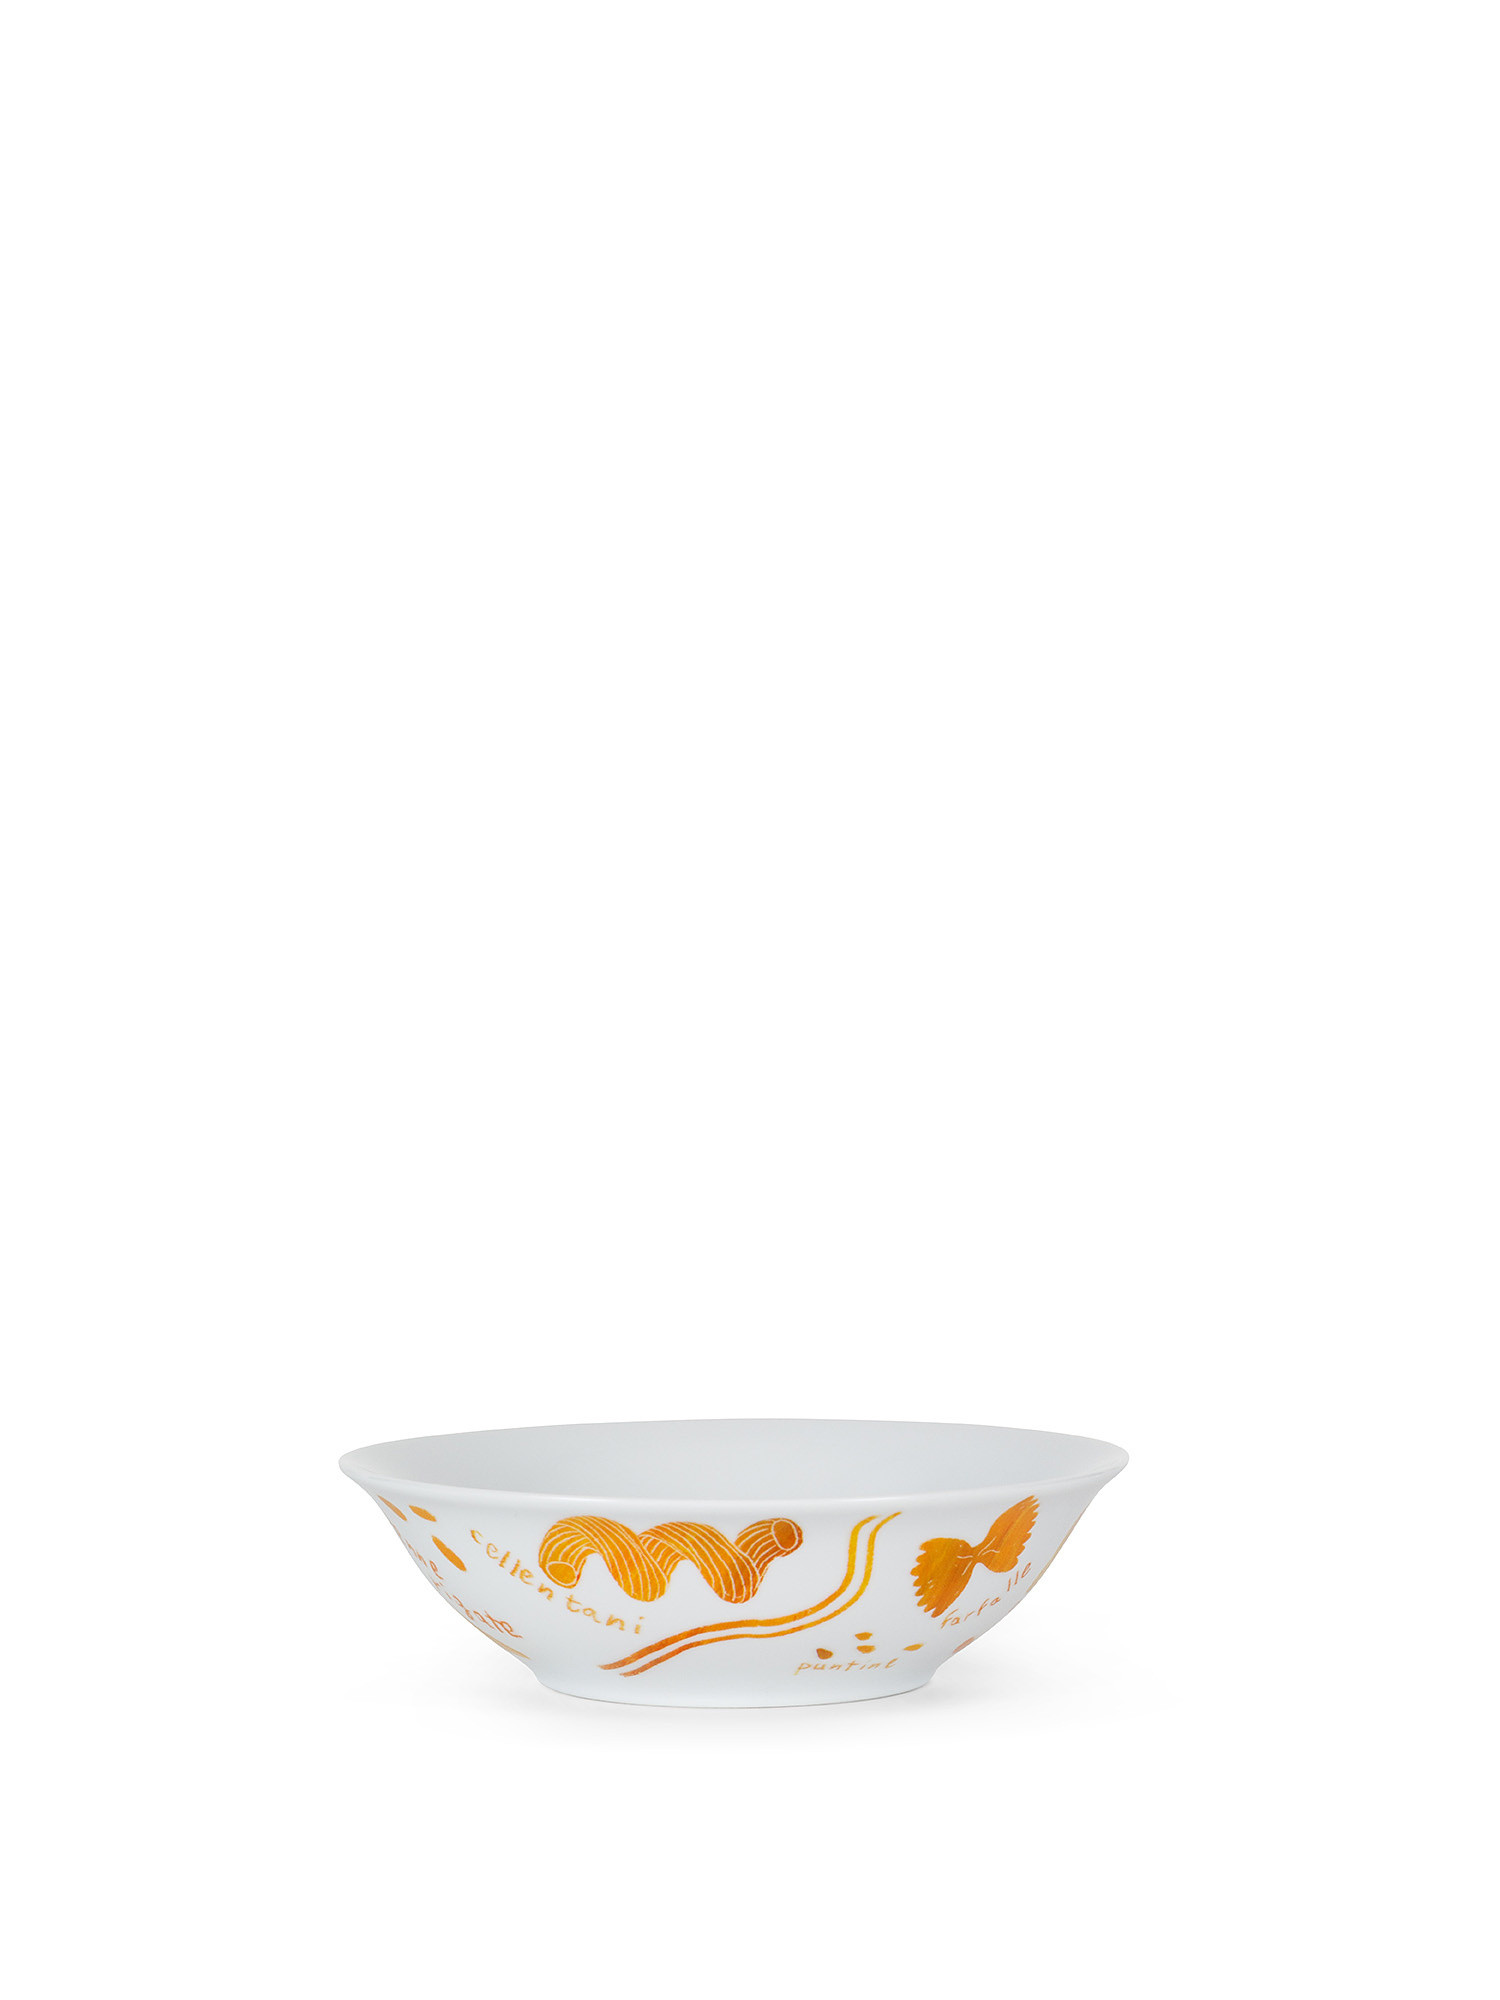 Porcelain soup plate with pasta motif, White, large image number 0